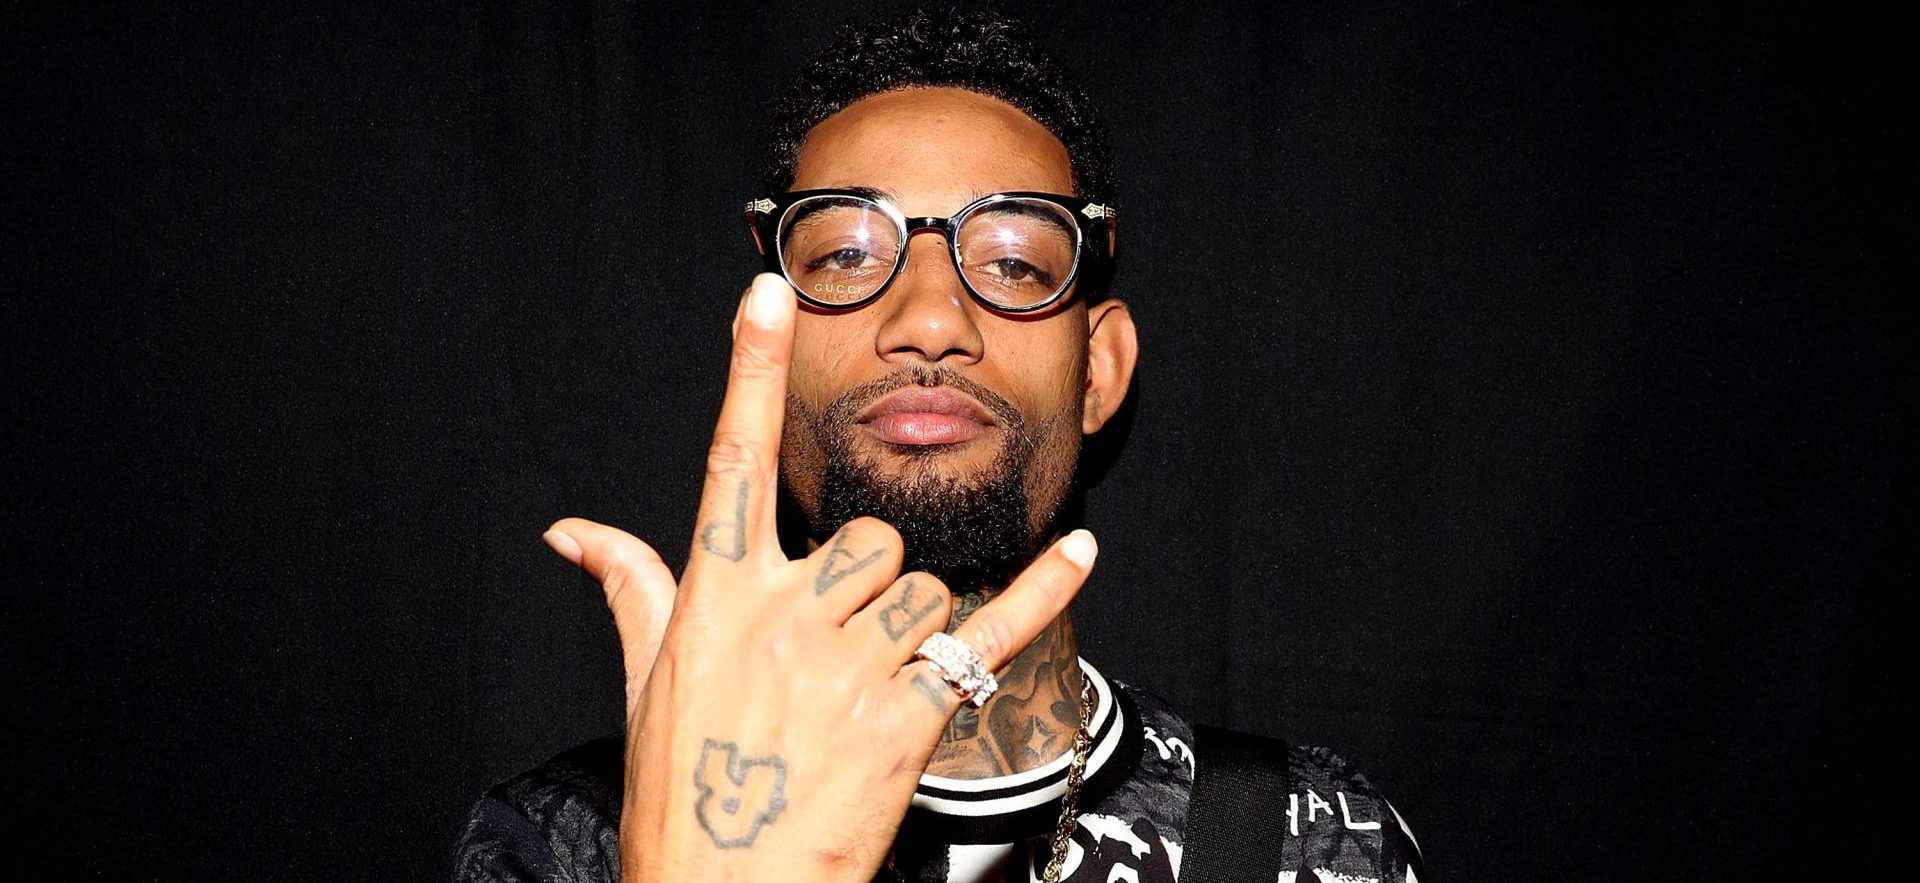 PnB Rock Tops The Apple Music Charts With His 2016 Hit ‘Selfish’ Just Days After His Passing